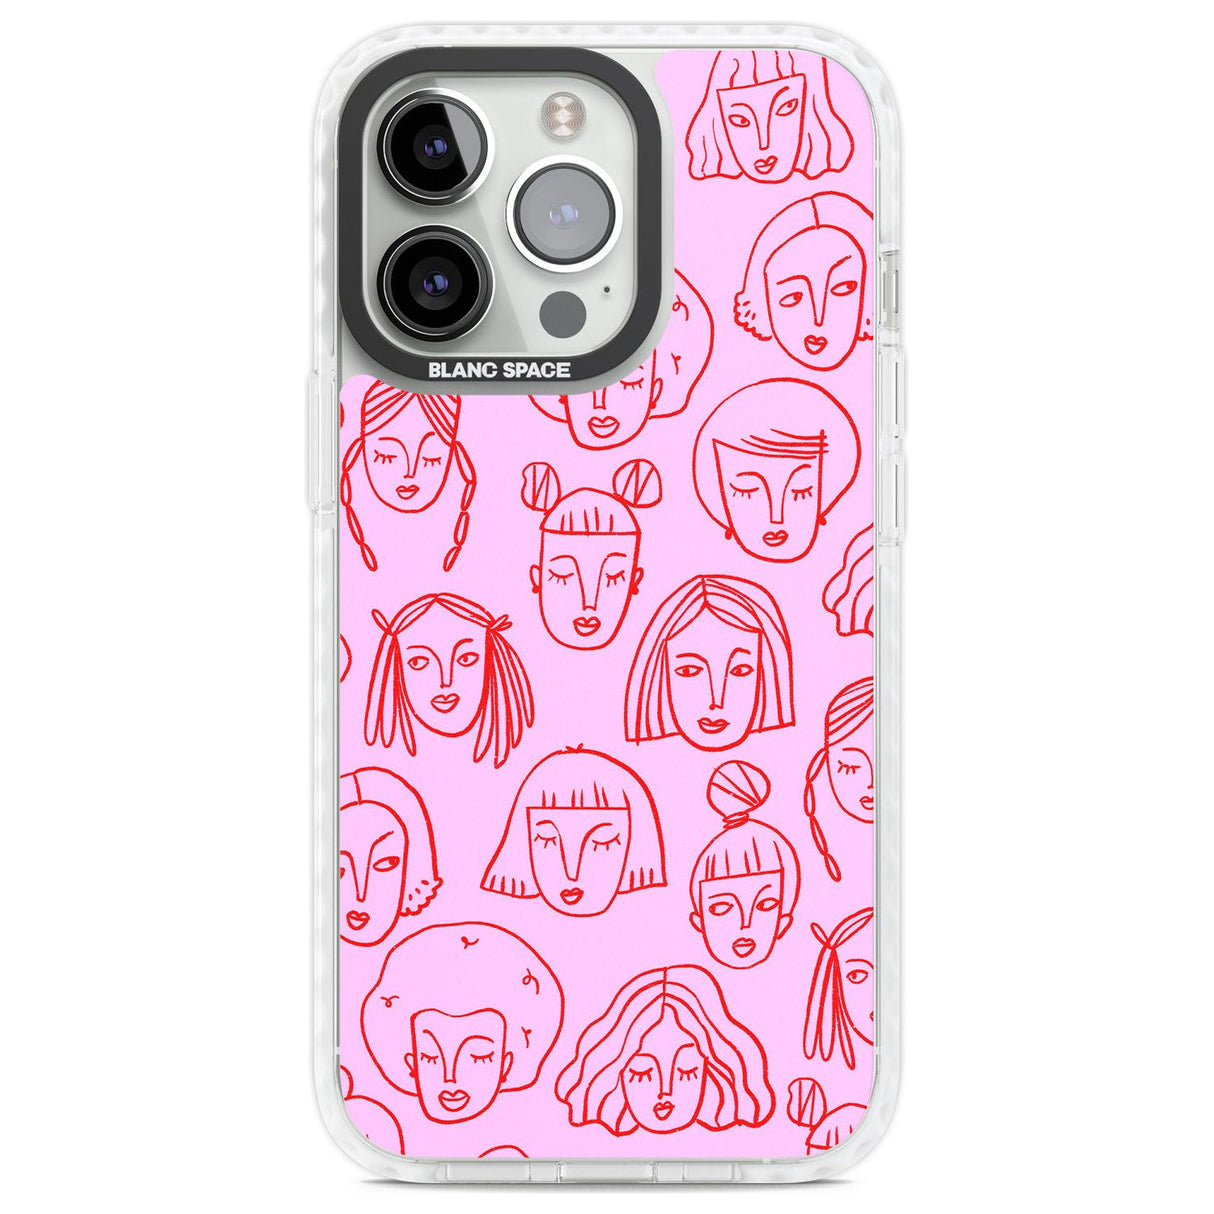 Girl Portrait Doodles in Pink & Red Phone Case iPhone 13 Pro / Impact Case,iPhone 14 Pro / Impact Case,iPhone 15 Pro Max / Impact Case,iPhone 15 Pro / Impact Case Blanc Space